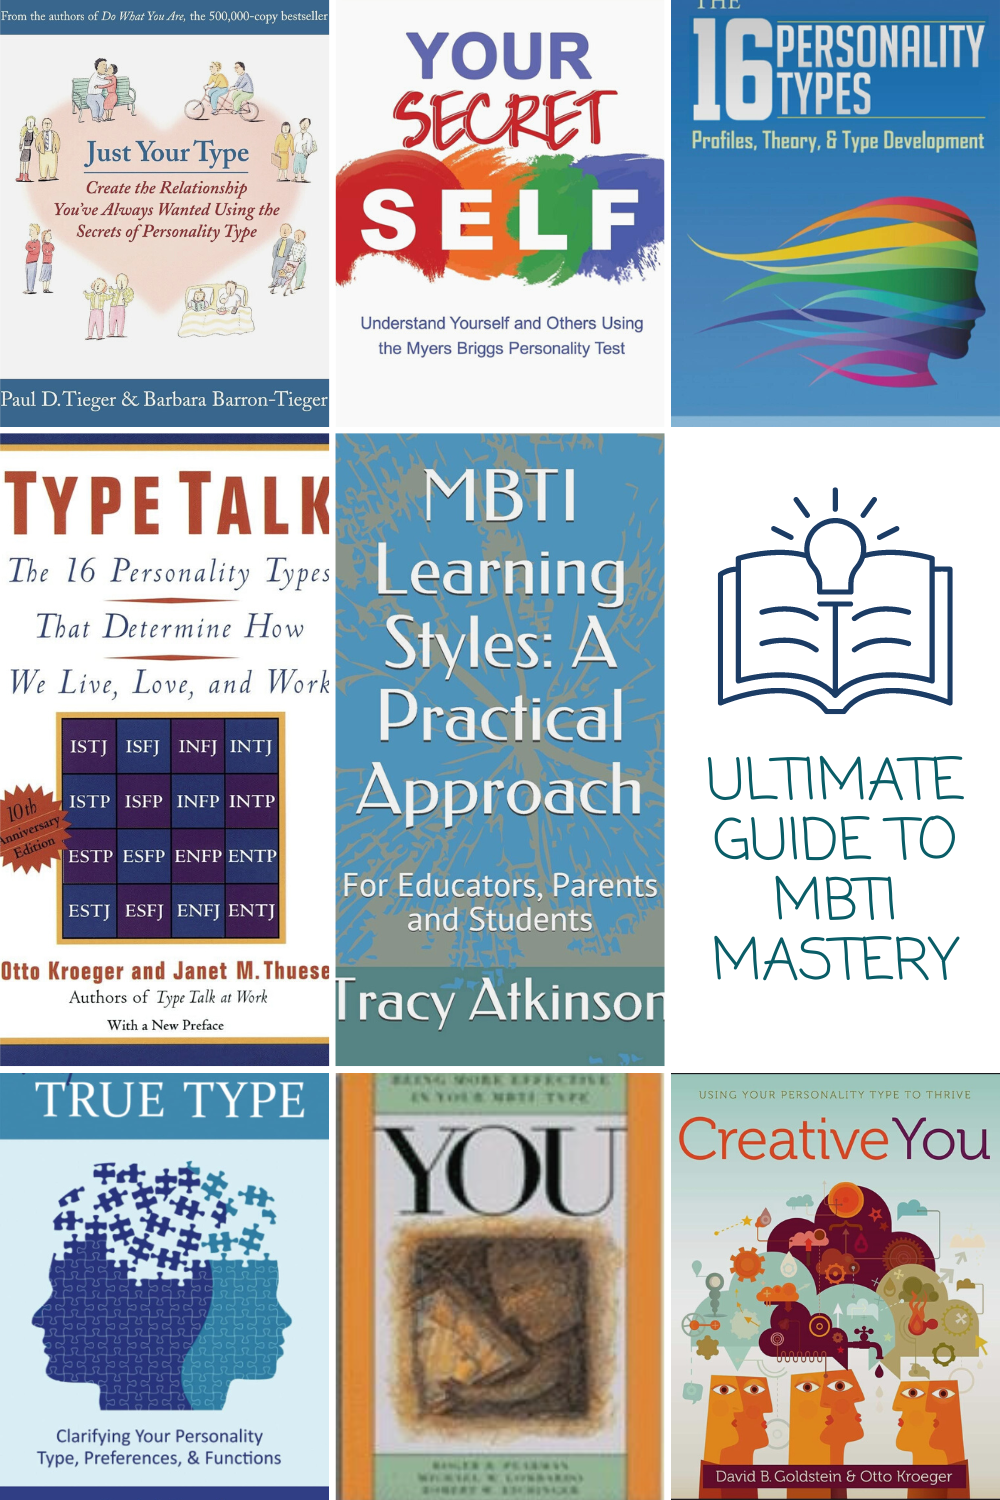 Ultimate Guide to MBTI Mastery